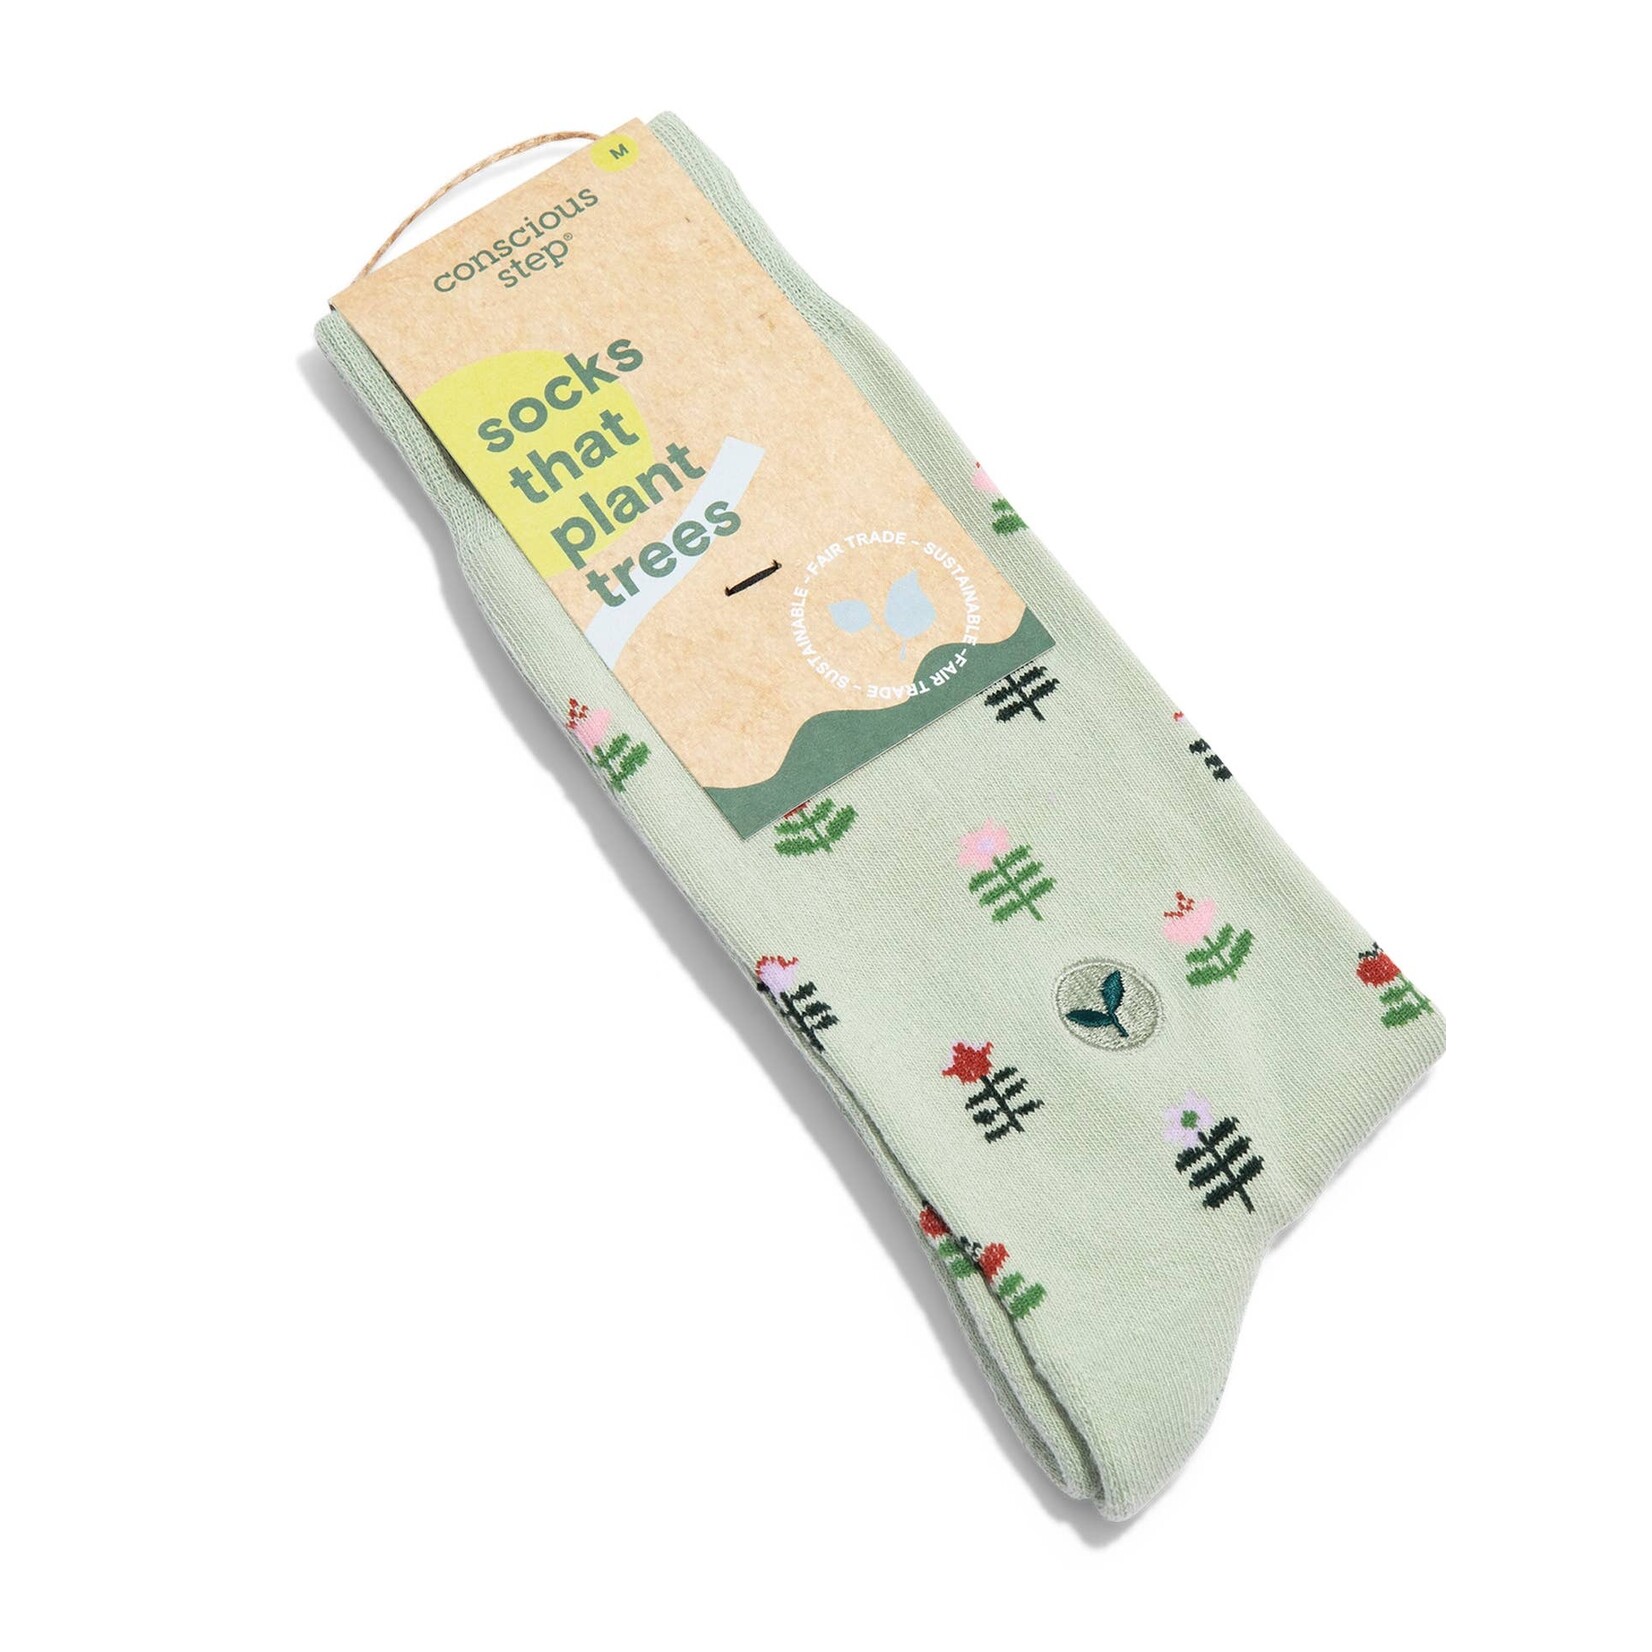 Conscious Step Socks that Plant Trees (Green Tulips) MD